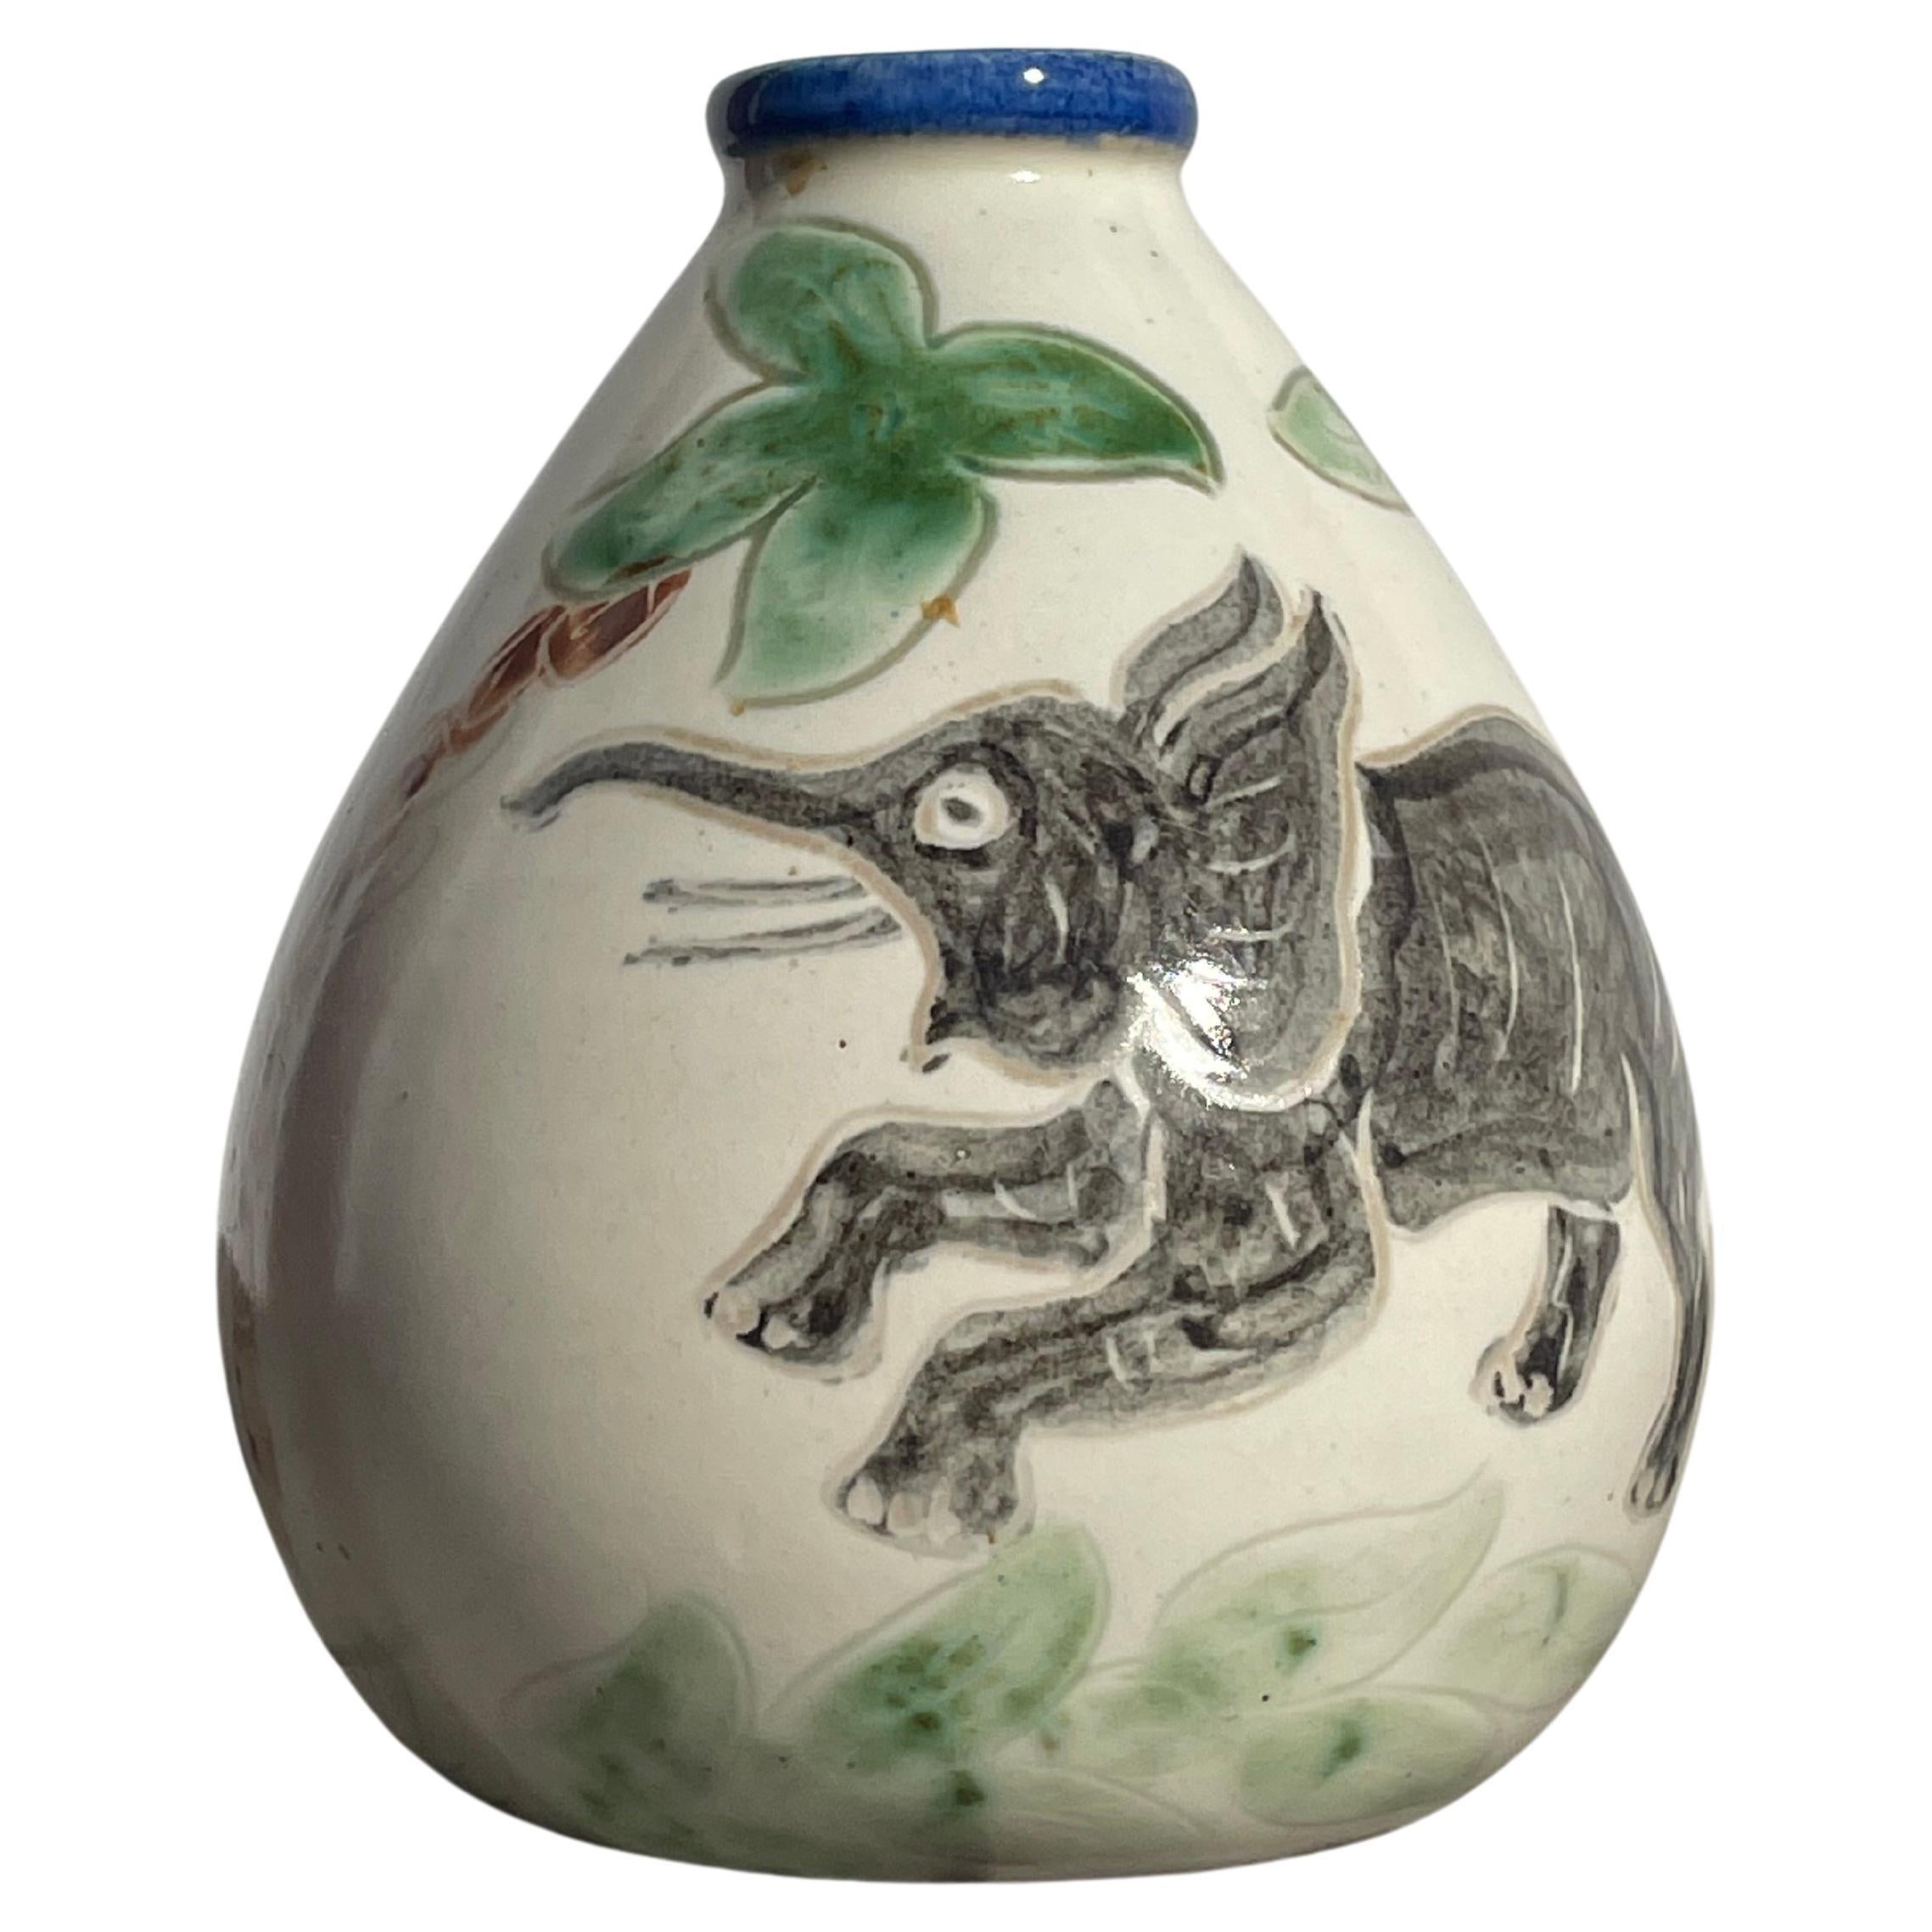 Grimstrup Hand-Decorated Vase with Elephants, Palmtrees, Leaves, 1950s For Sale